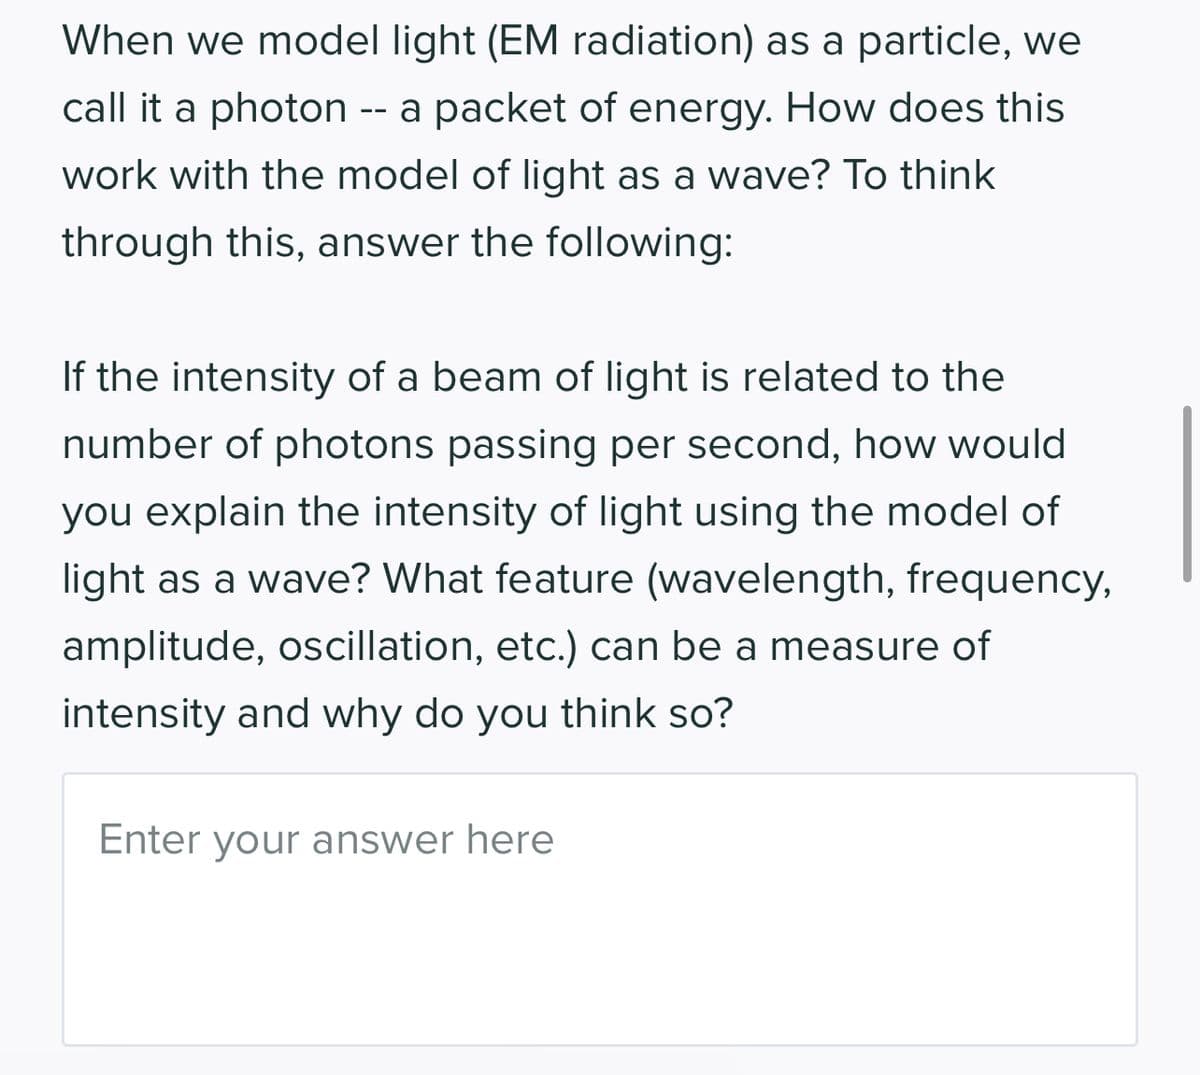 When we model light (EM radiation) as a particle, we
call it a photon a packet of energy. How does this
work with the model of light as a wave? To think
through this, answer the following:
If the intensity of a beam of light is related to the
number of photons passing per second, how would
you explain the intensity of light using the model of
light as a wave? What feature (wavelength, frequency,
amplitude, oscillation, etc.) can be a measure of
intensity and why do you think so?
Enter your answer here